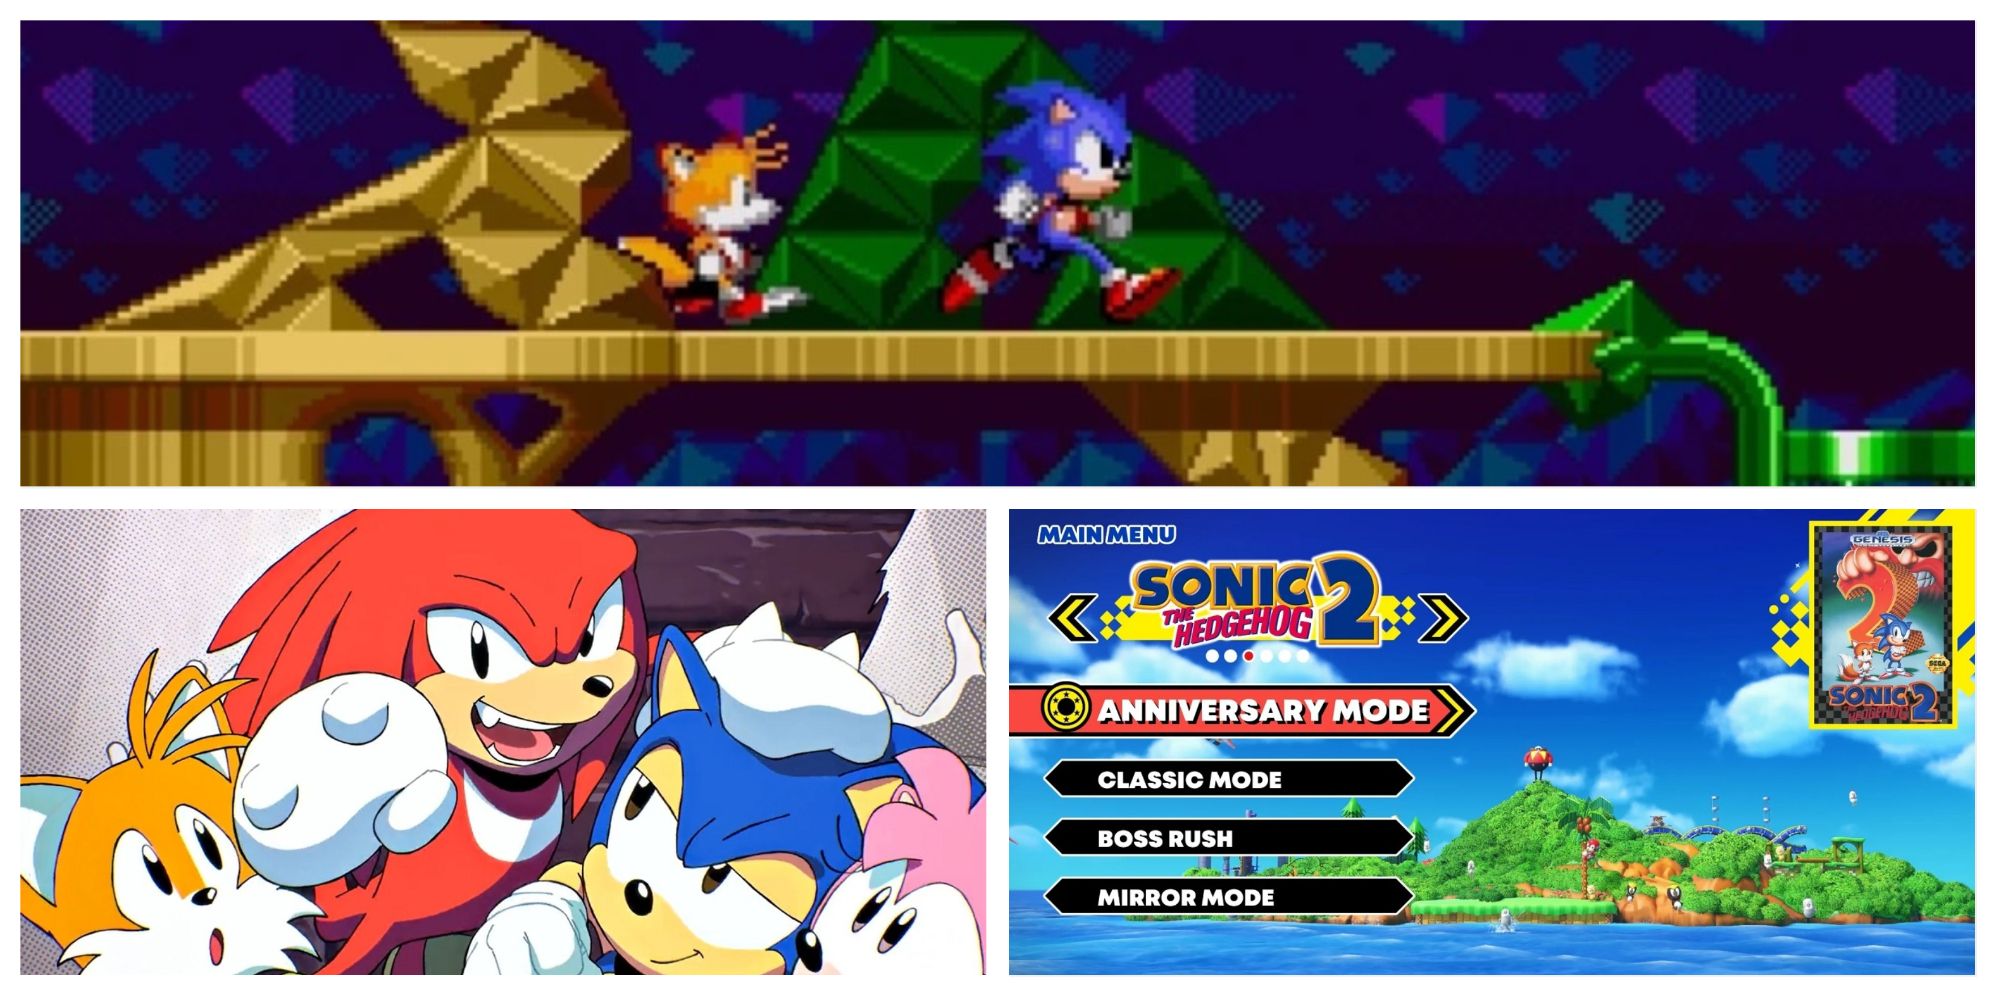 Sonic Origins Plus cheat codes: find Hidden Palace Zone and get